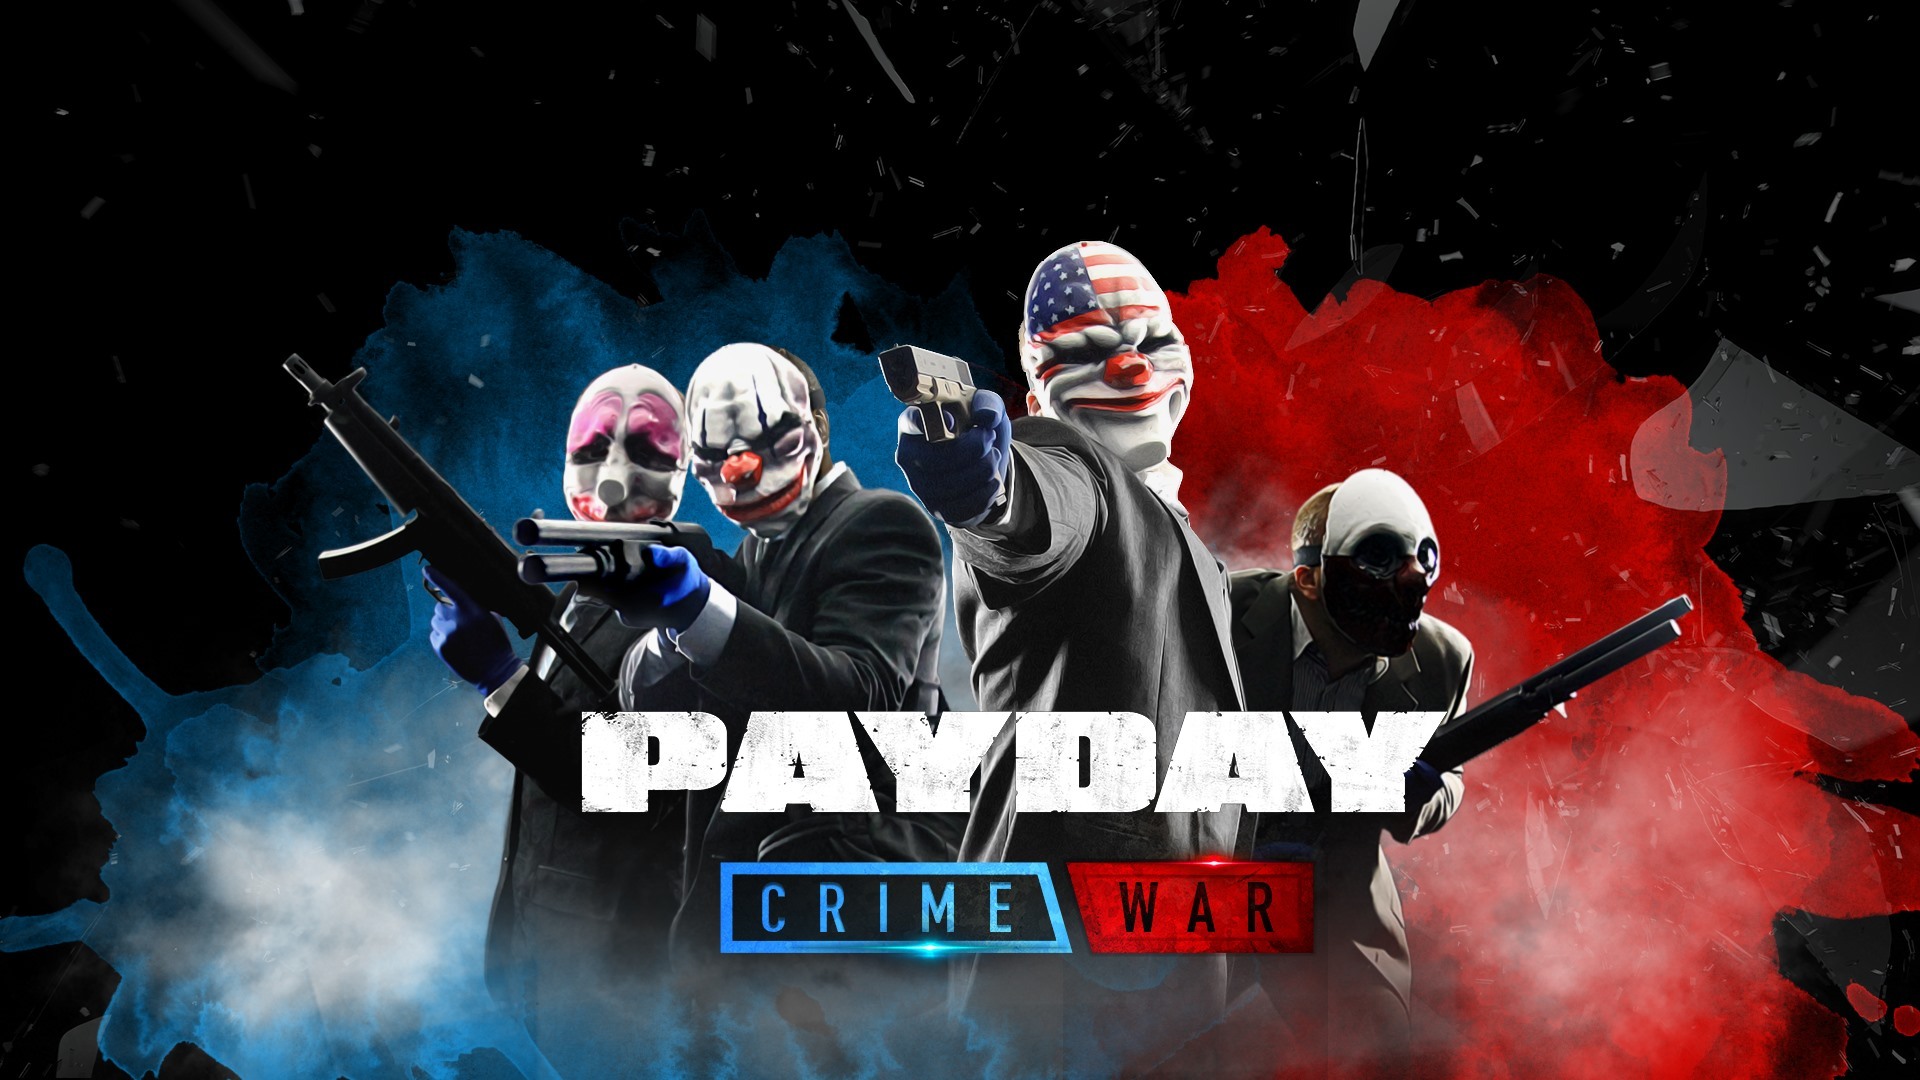 PAYDAY: Crime War on PC